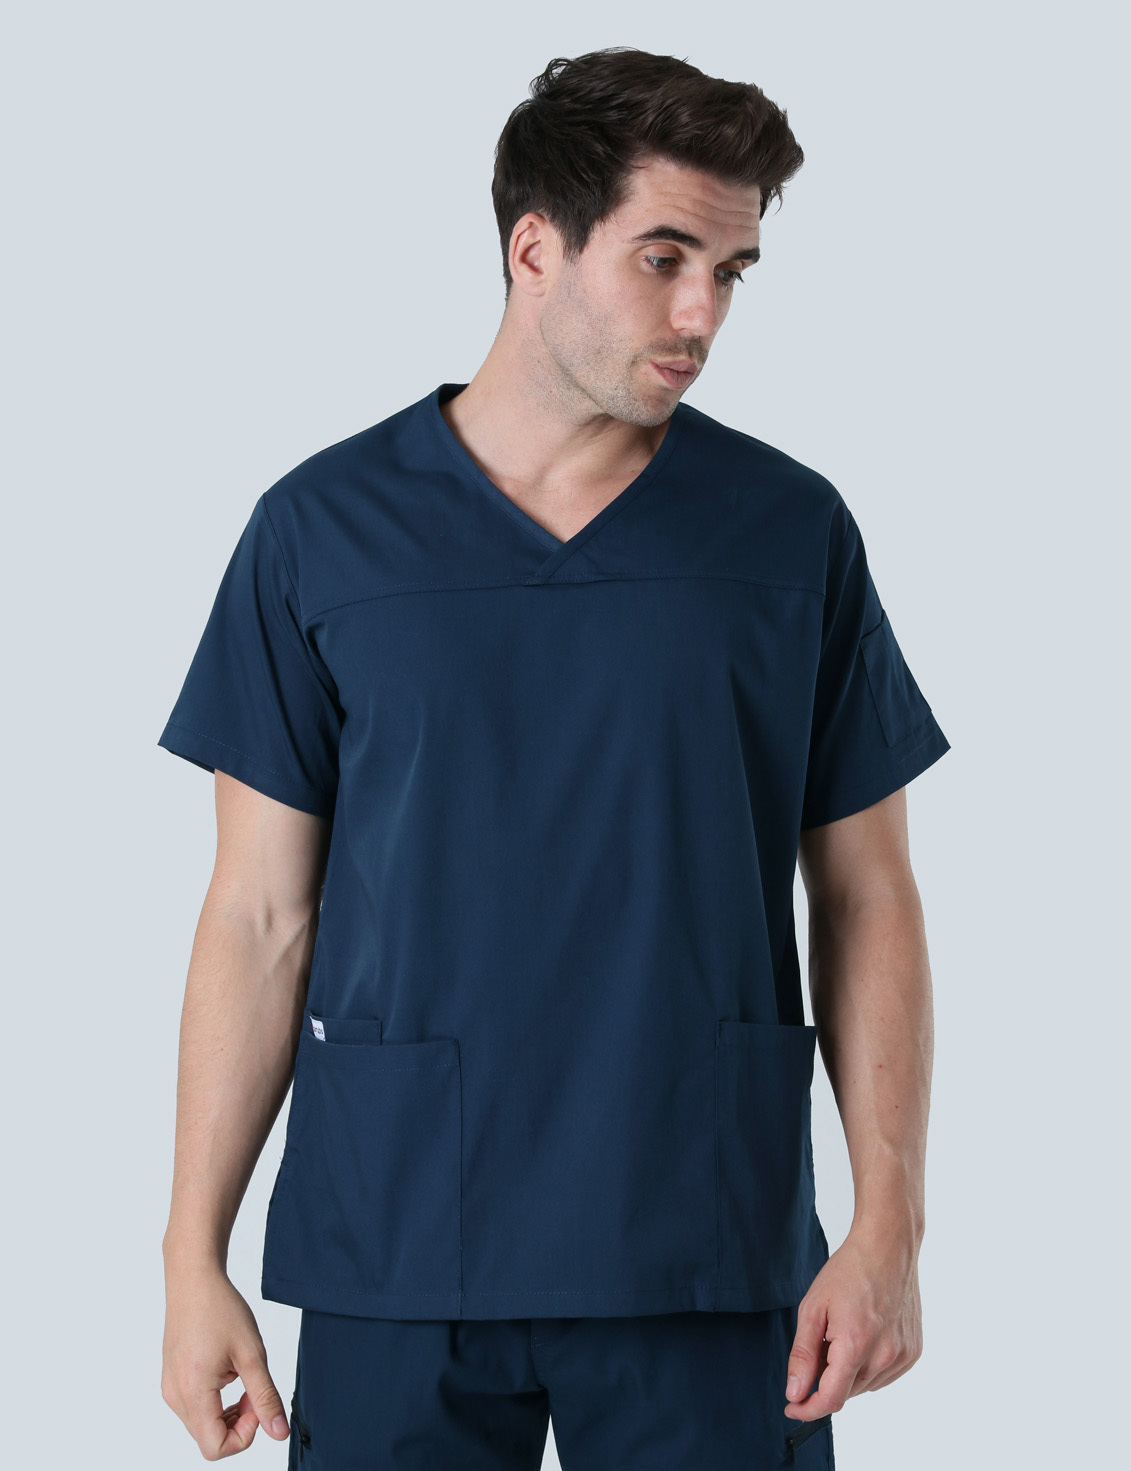 Men's Fit Solid Scrub Top - Navy - Large